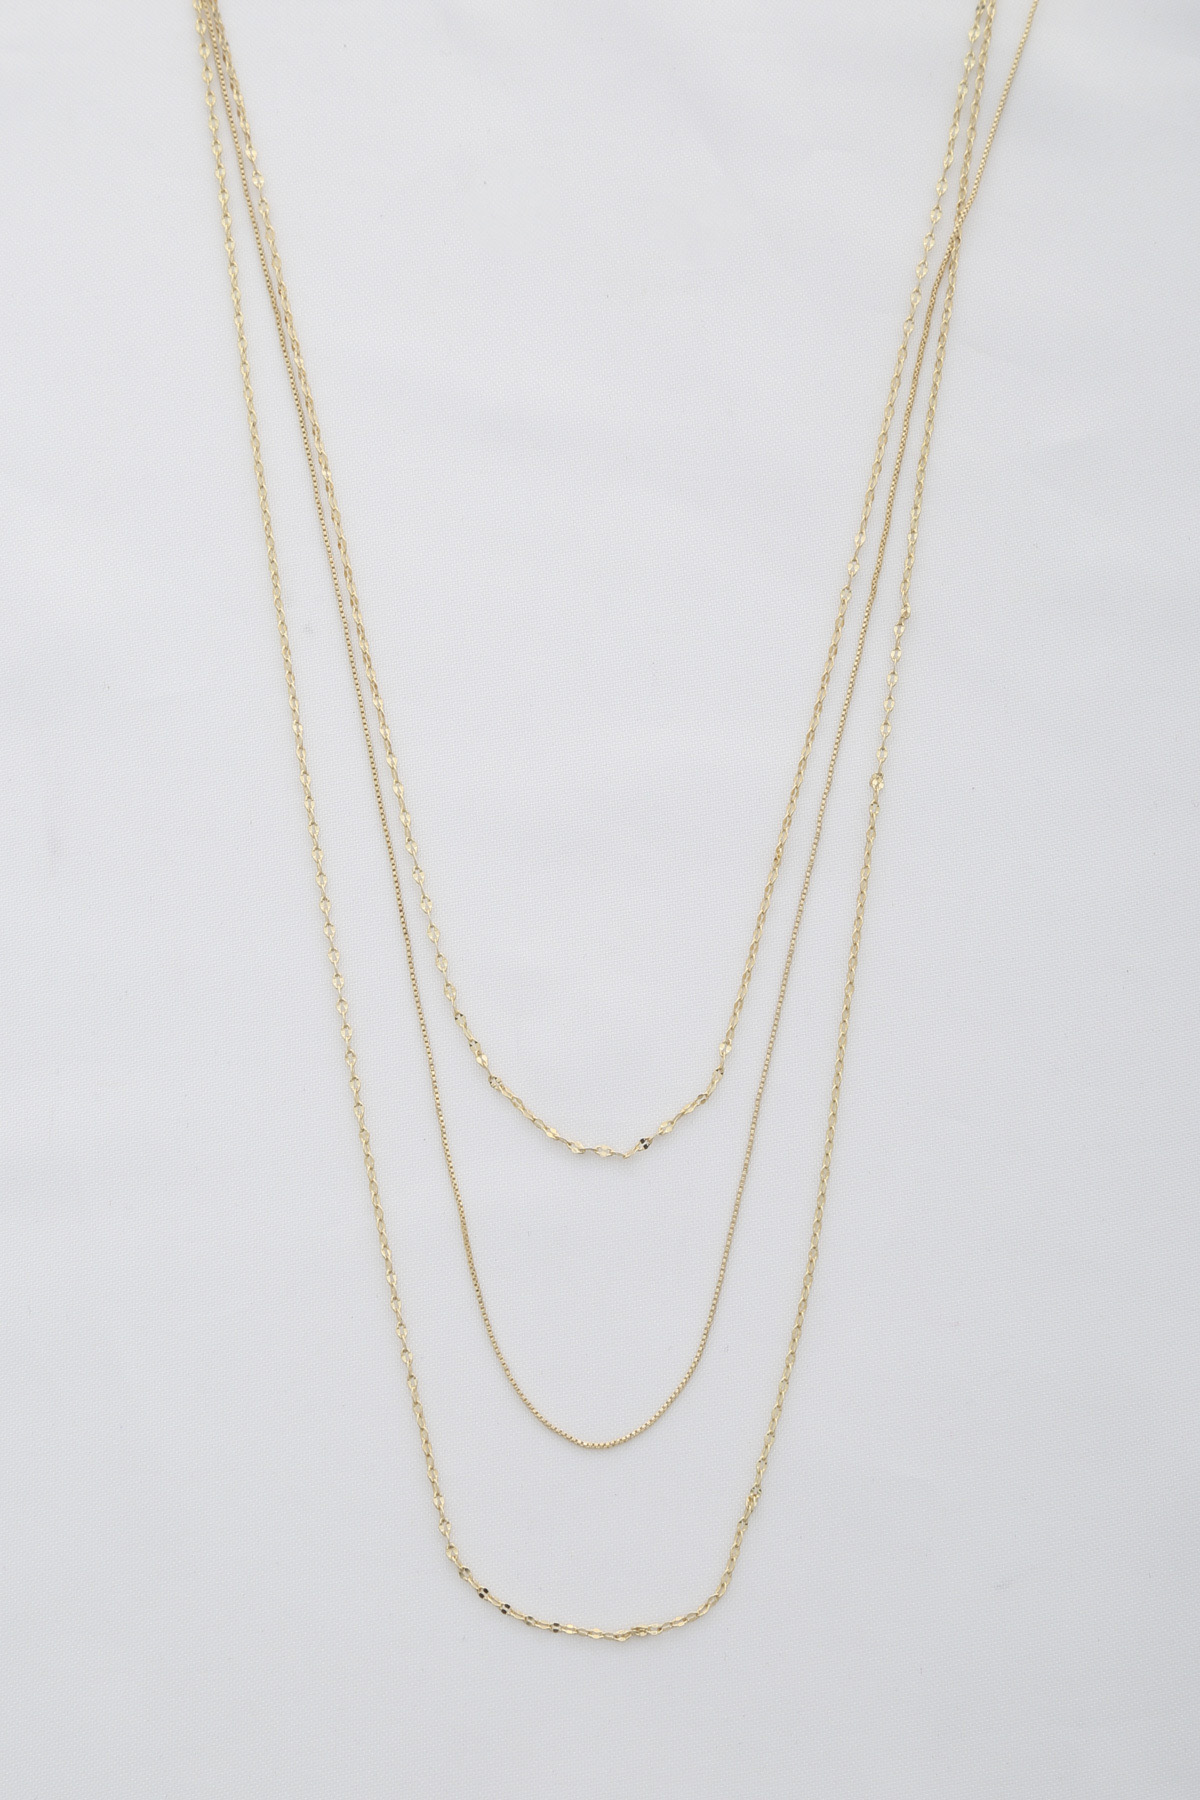 DAINTY LAYERED METAL NECKLACE